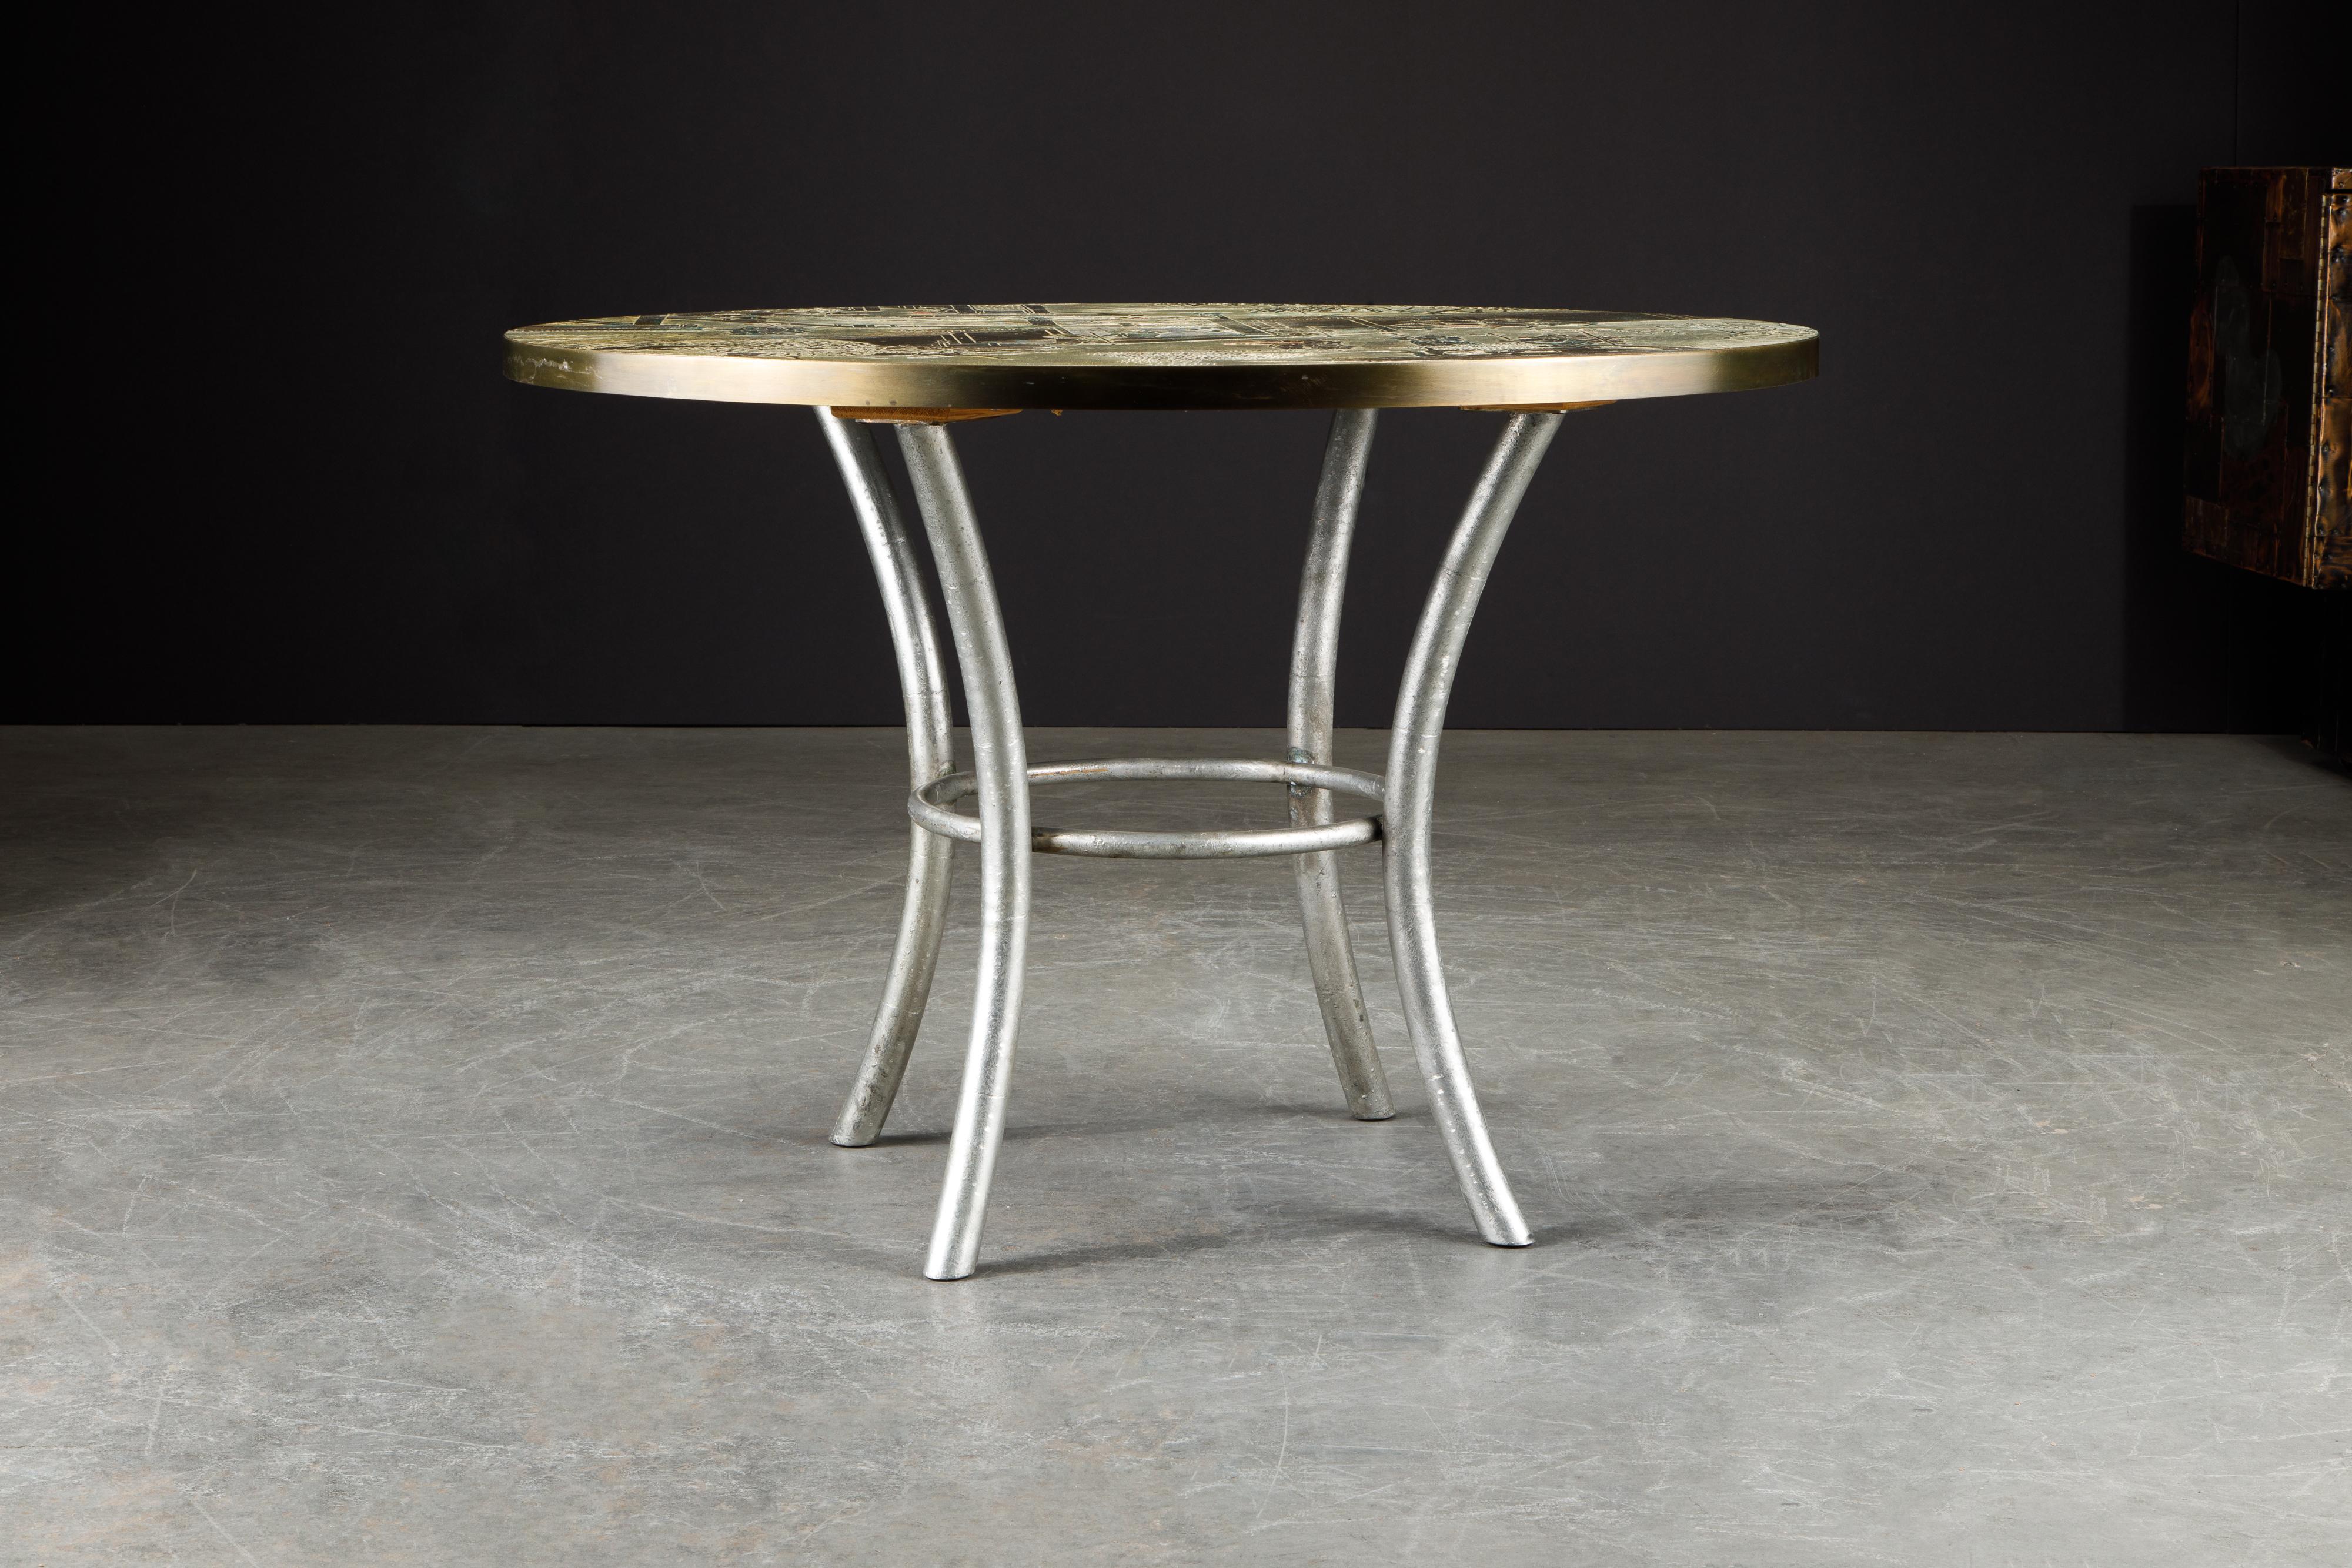 This is a rare example of the Classic and highly sought after 'Chan' cocktail table but in a special form of a game table which can also be used as a center table or cafe / dining table, by father and son team, Philip and Kelvin LaVerne, produced in